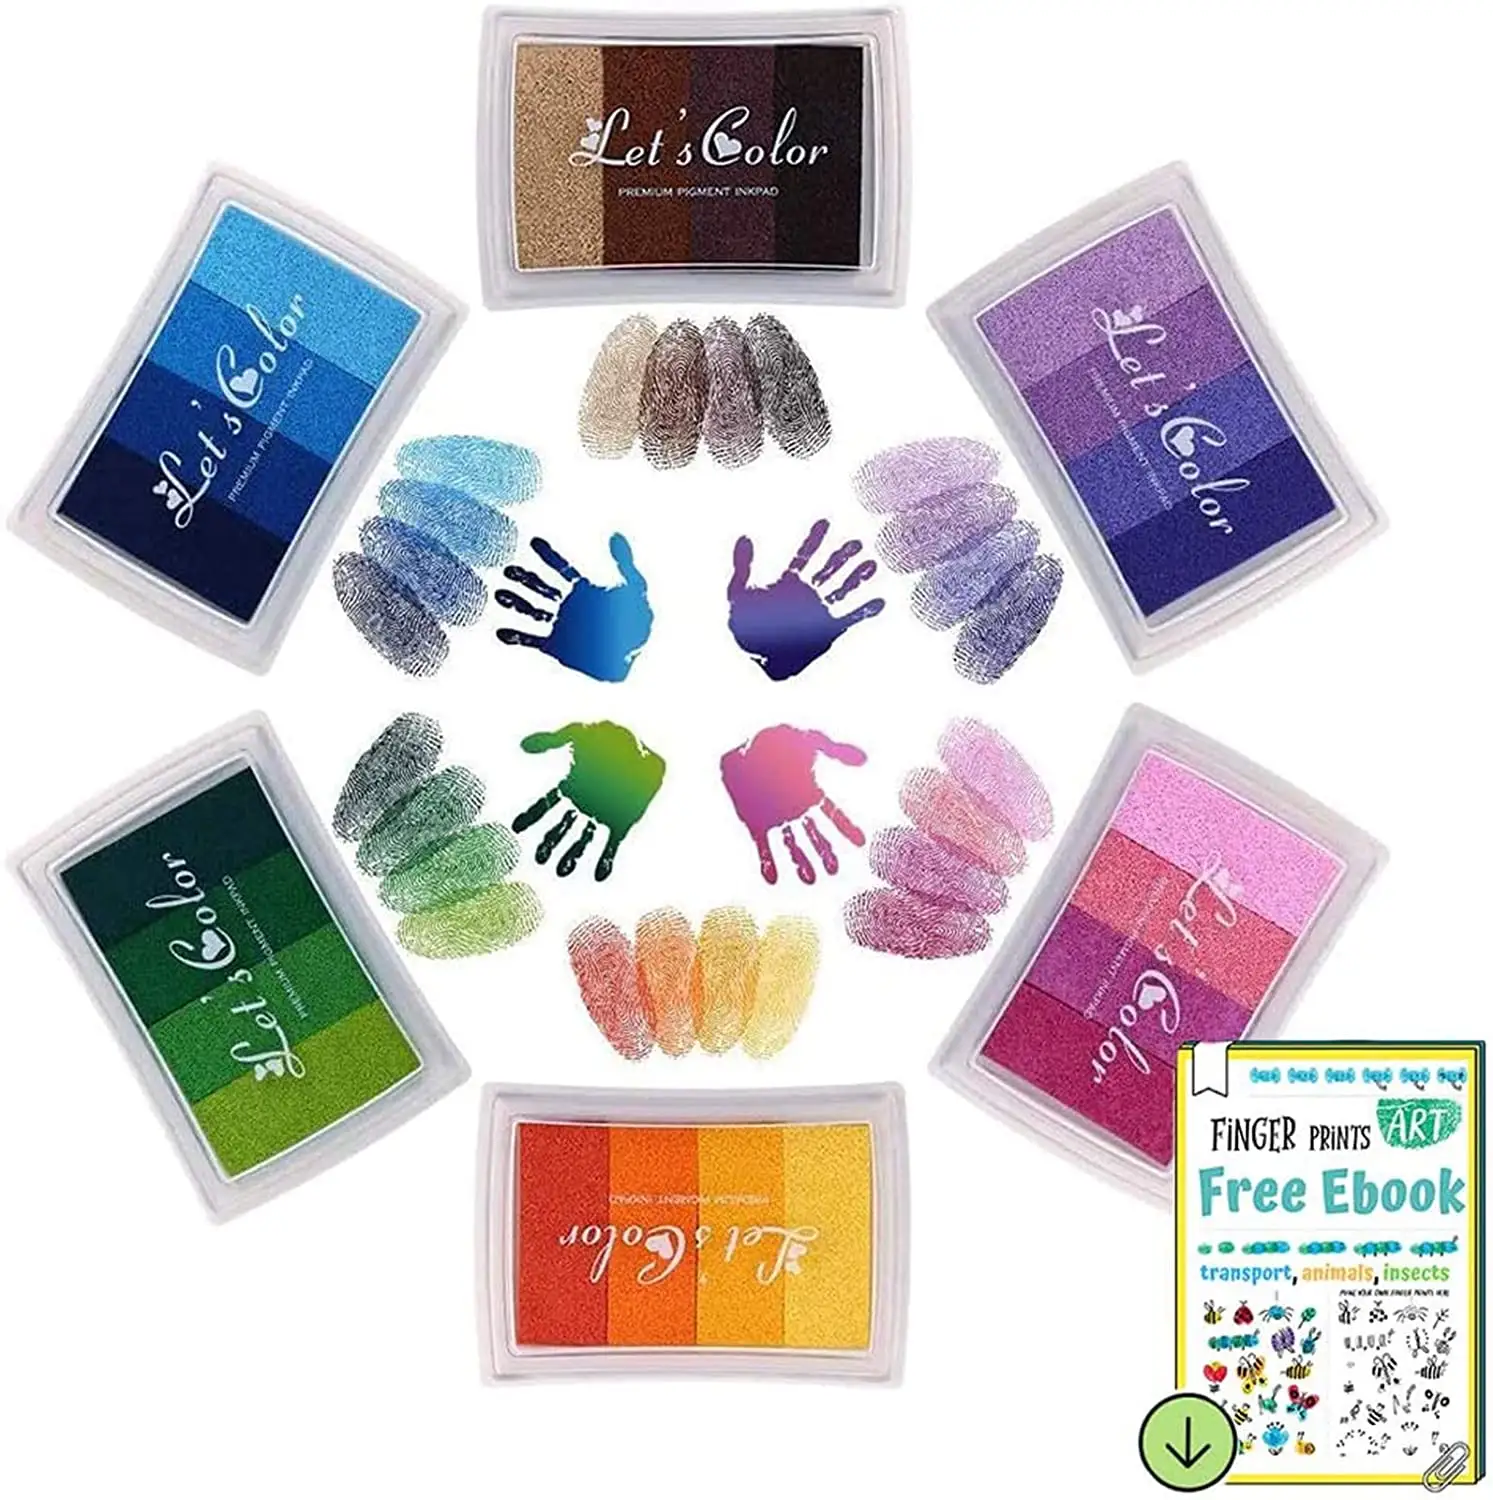 Ink Pad Set Fingerprint Ink Pad Non-Toxic Washable Stamp Pad with 4 Sheets of Fingerprint Stamp Book for Paper Crafts Fabric